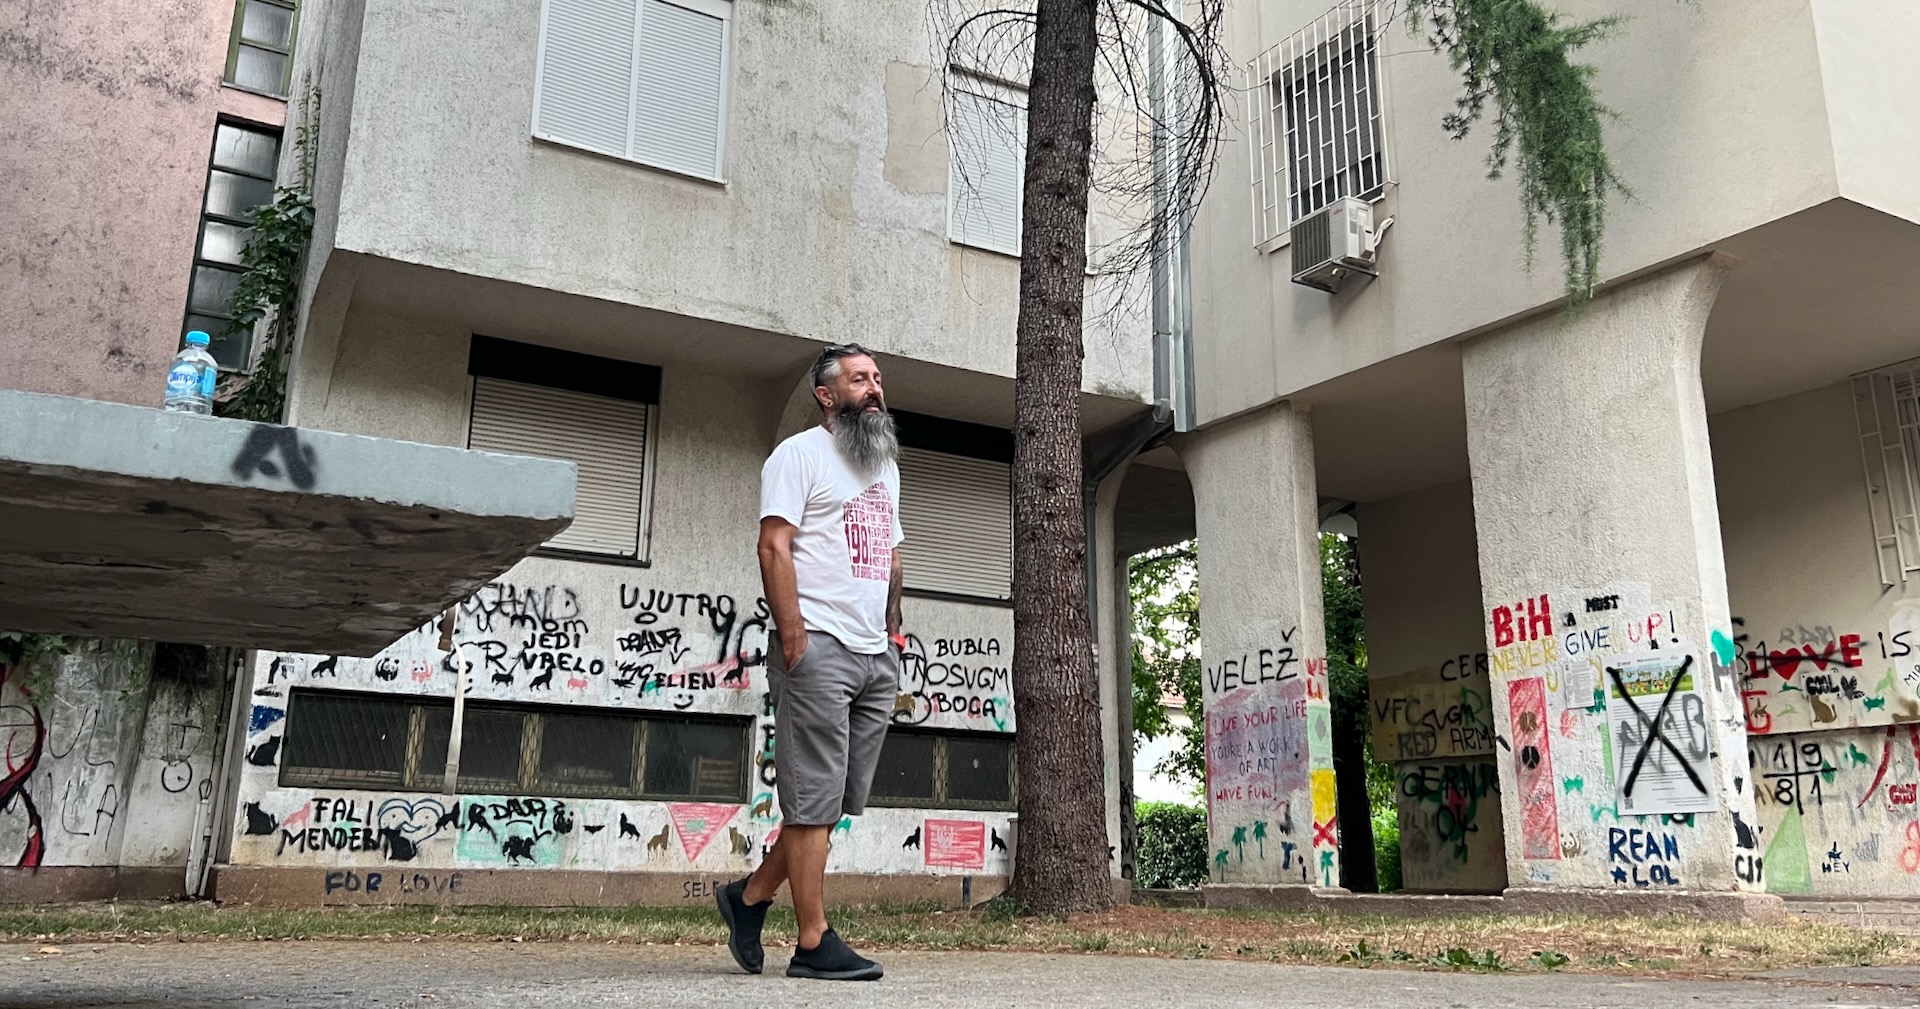 Ševko took us here to this apartment complex scuffed up by the war. The graffiti in the background refers to the local soccer rivalry (see the word Velež). To an outsider, this feels like a proxy between ethnic groups of the city. FK Velež Mostar is Bosniak Muslim and its rival, HŠK Zrinjski Mostar, is Croat Catholic.